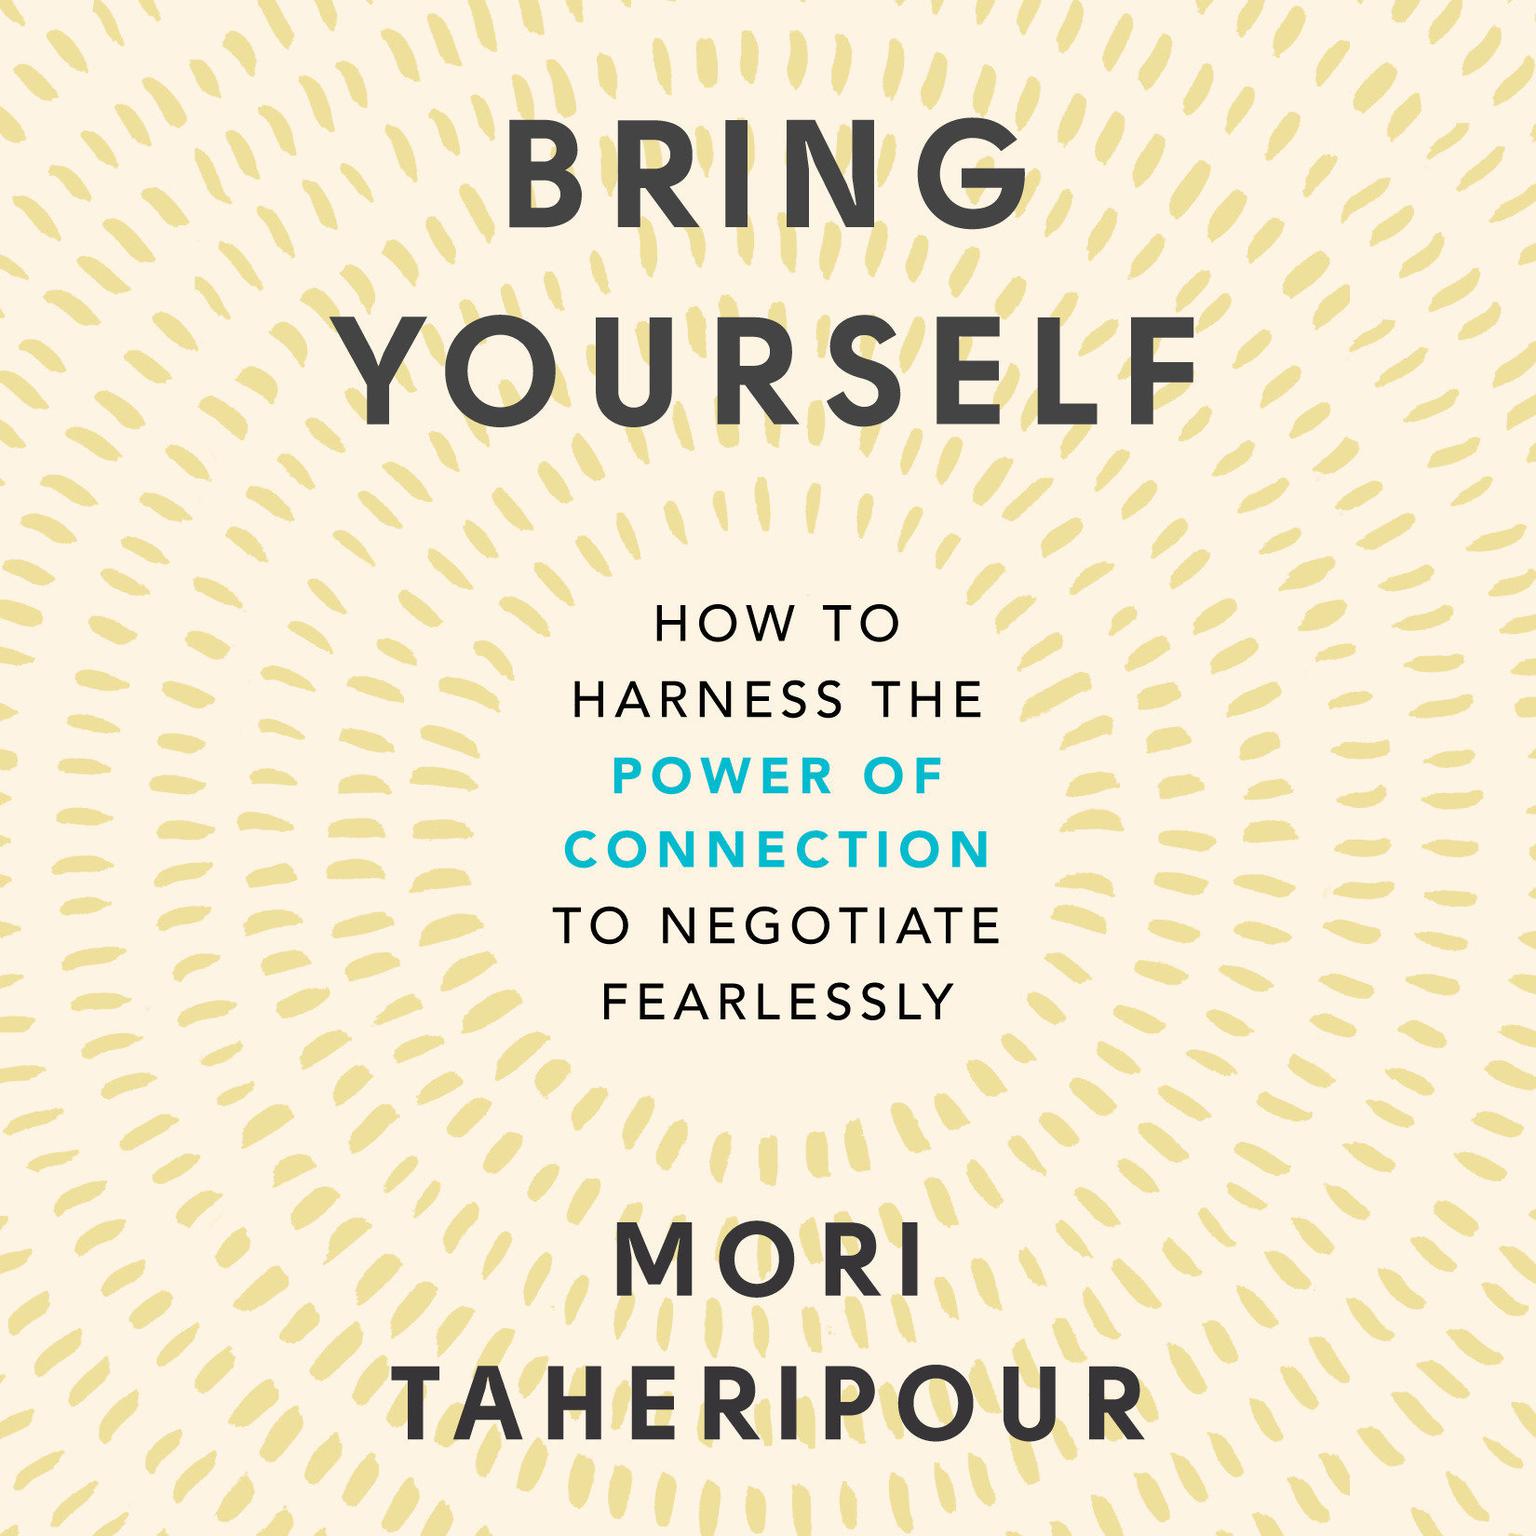 Bring Yourself: How to Harness the Power of Connection to Negotiate Fearlessly Audiobook, by Mori Taheripour